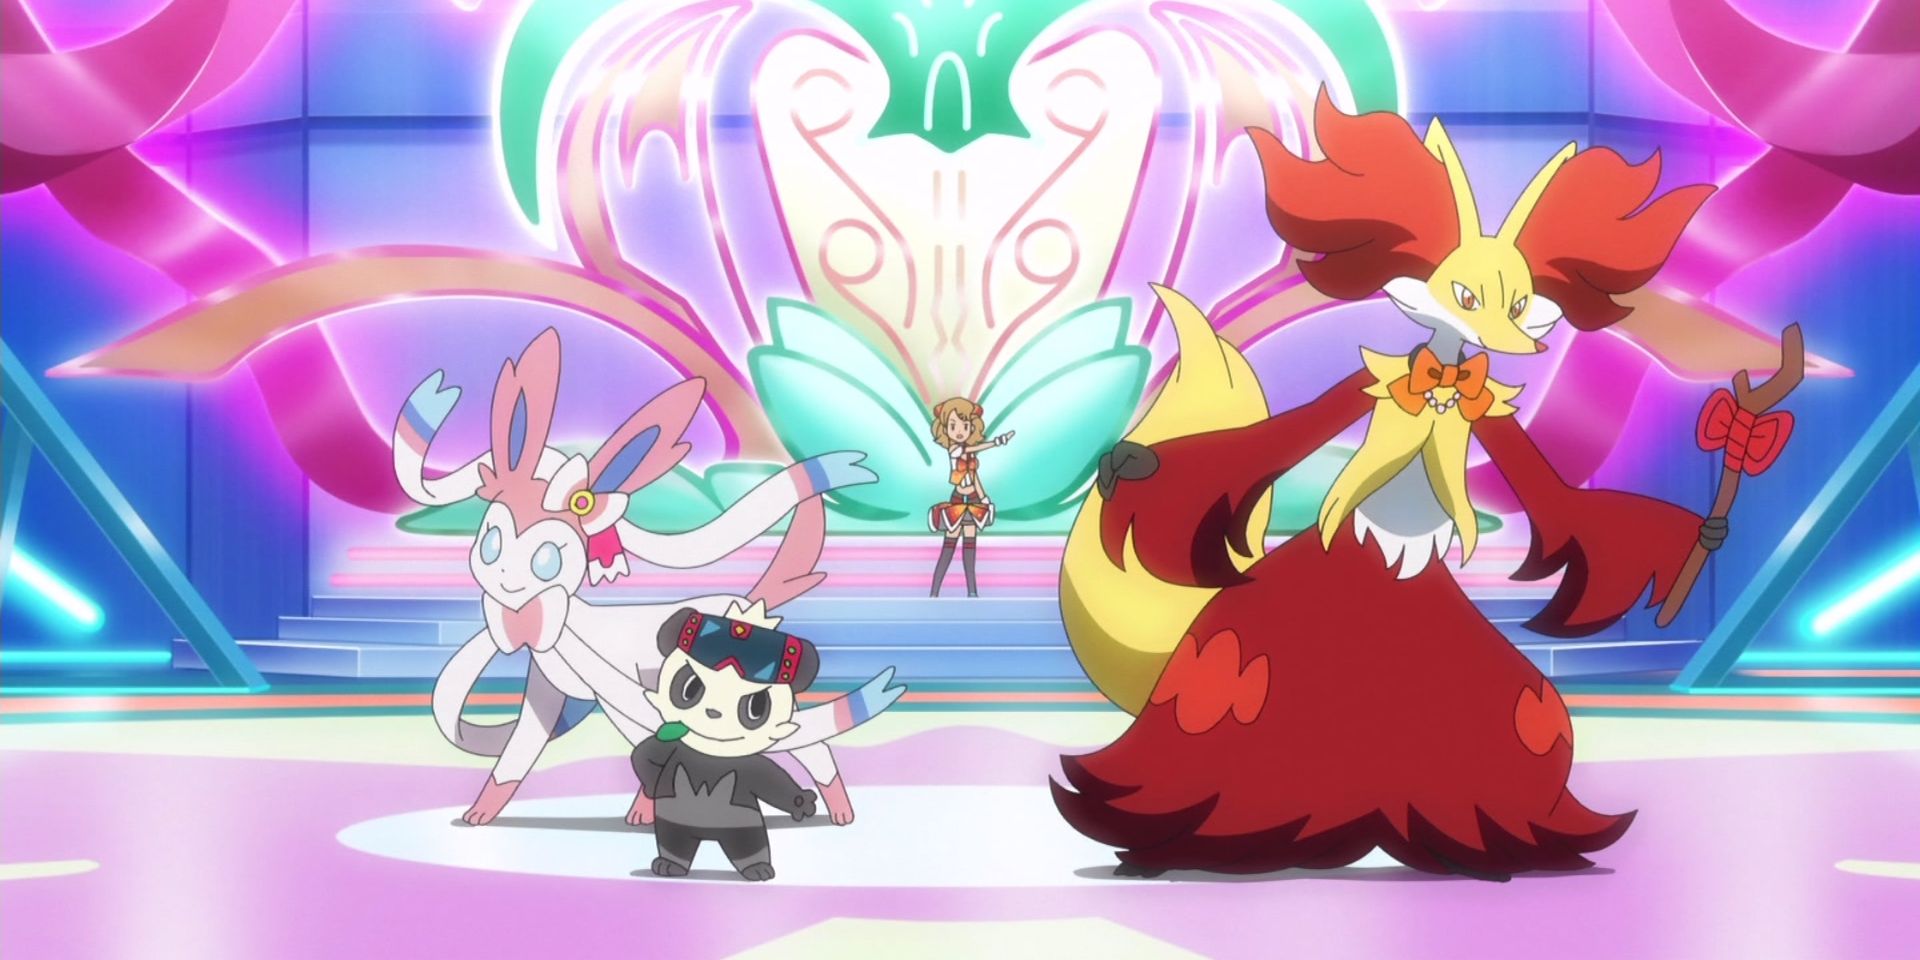 Serena and her Delphox, Sylveon, and Pancham performing in Pokemon Master Journeys